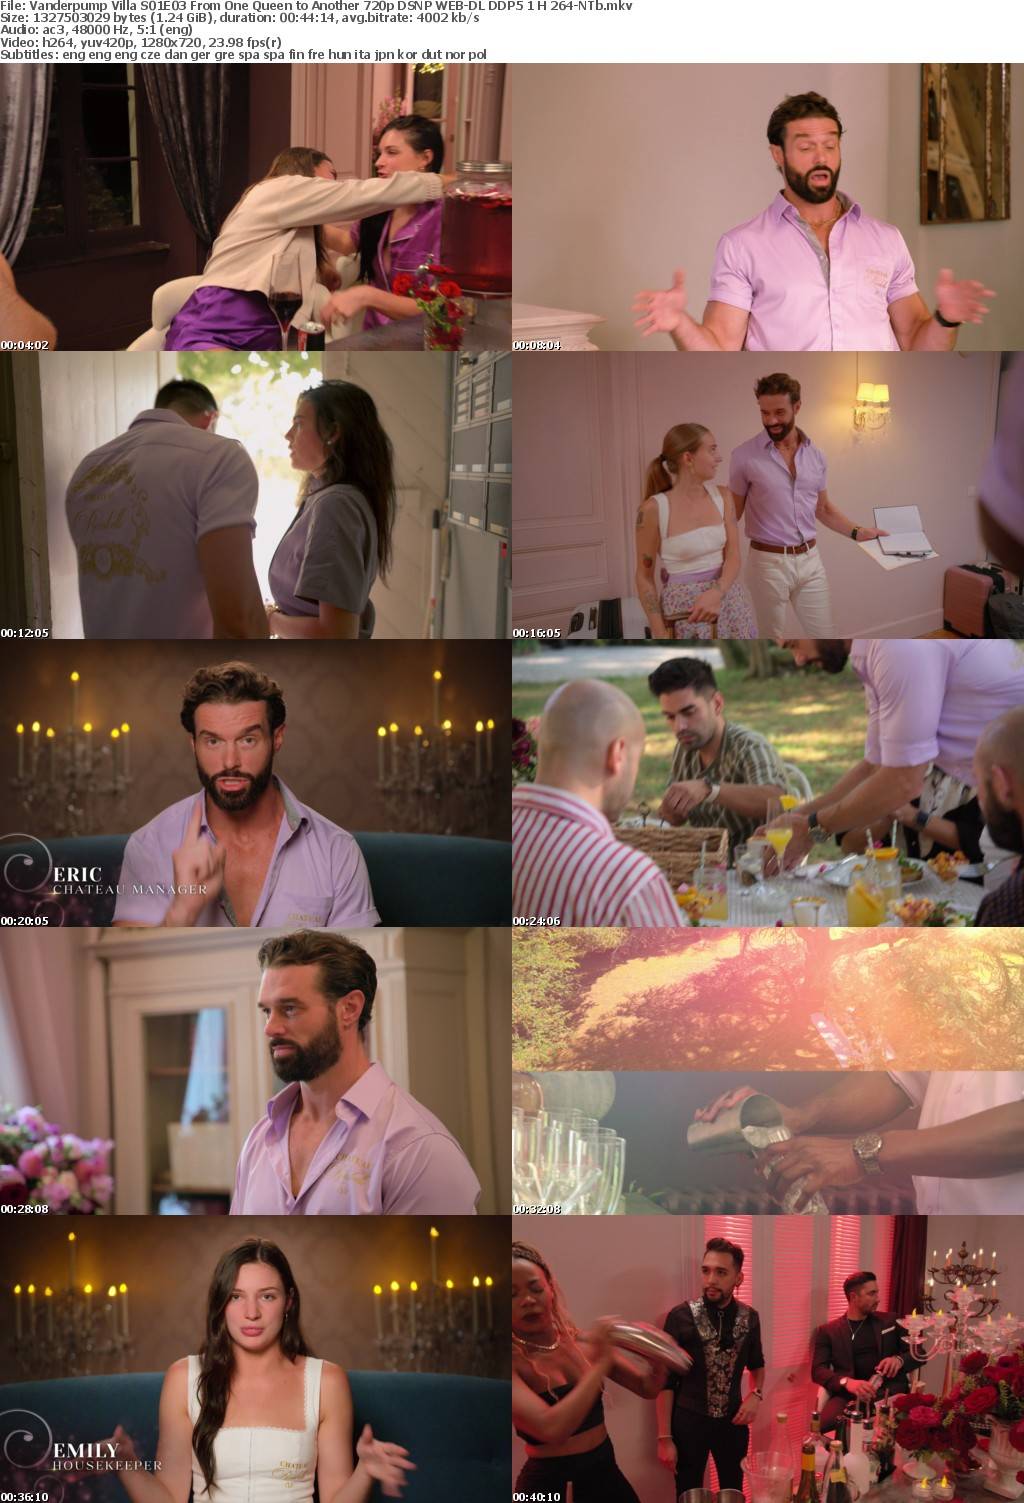 Vanderpump Villa S01E03 From One Queen to Another 720p DSNP WEB-DL DDP5 1 H 264-NTb